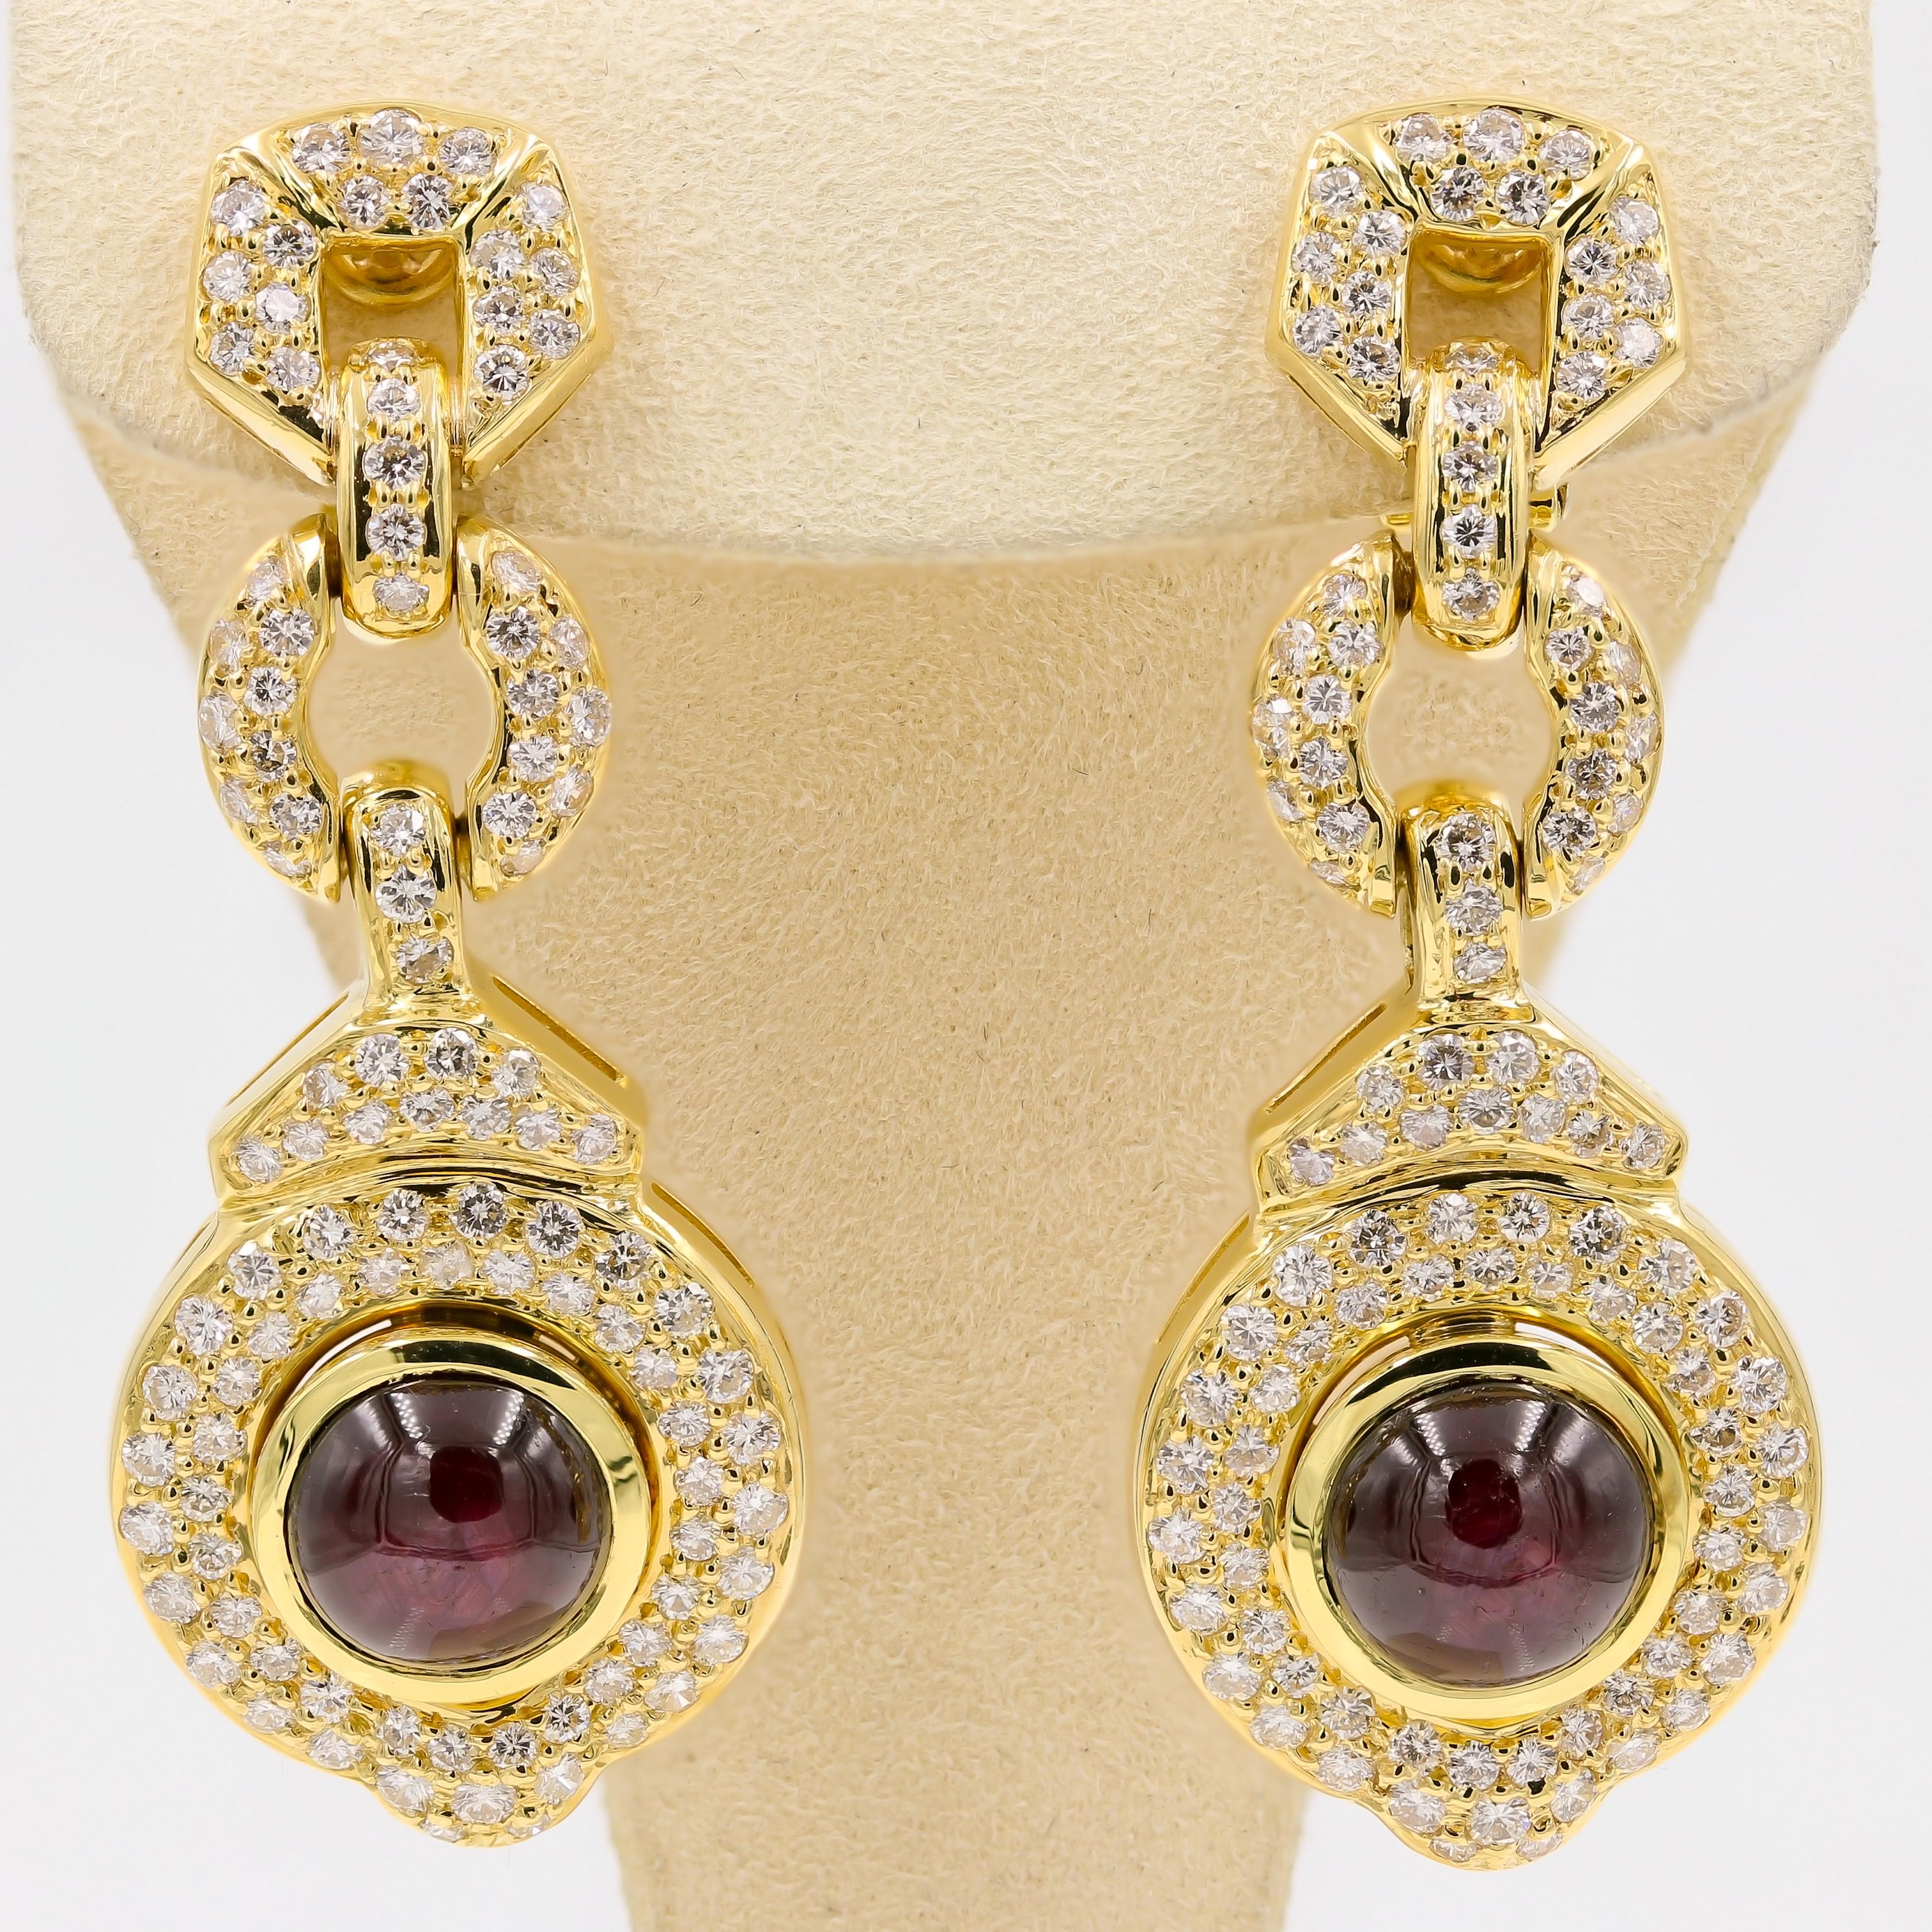 Contemporary 16.97 Carat Cabochon Cut Star Ruby and Diamond Earrings in 18 Karat Yellow Gold For Sale